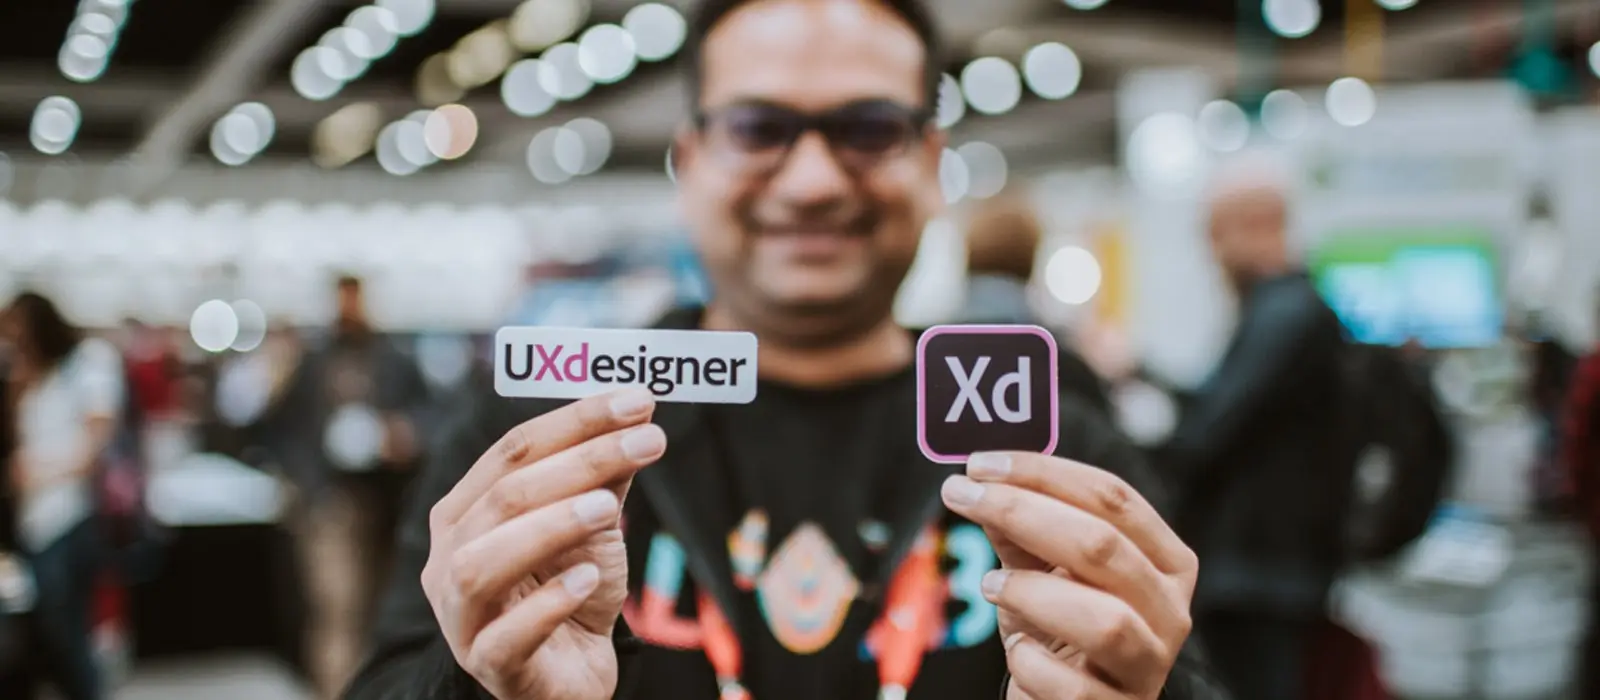 An attendee at Adobe MAX 2018 poses for the camera while holding UXdesigner and Adobe XD stickers.